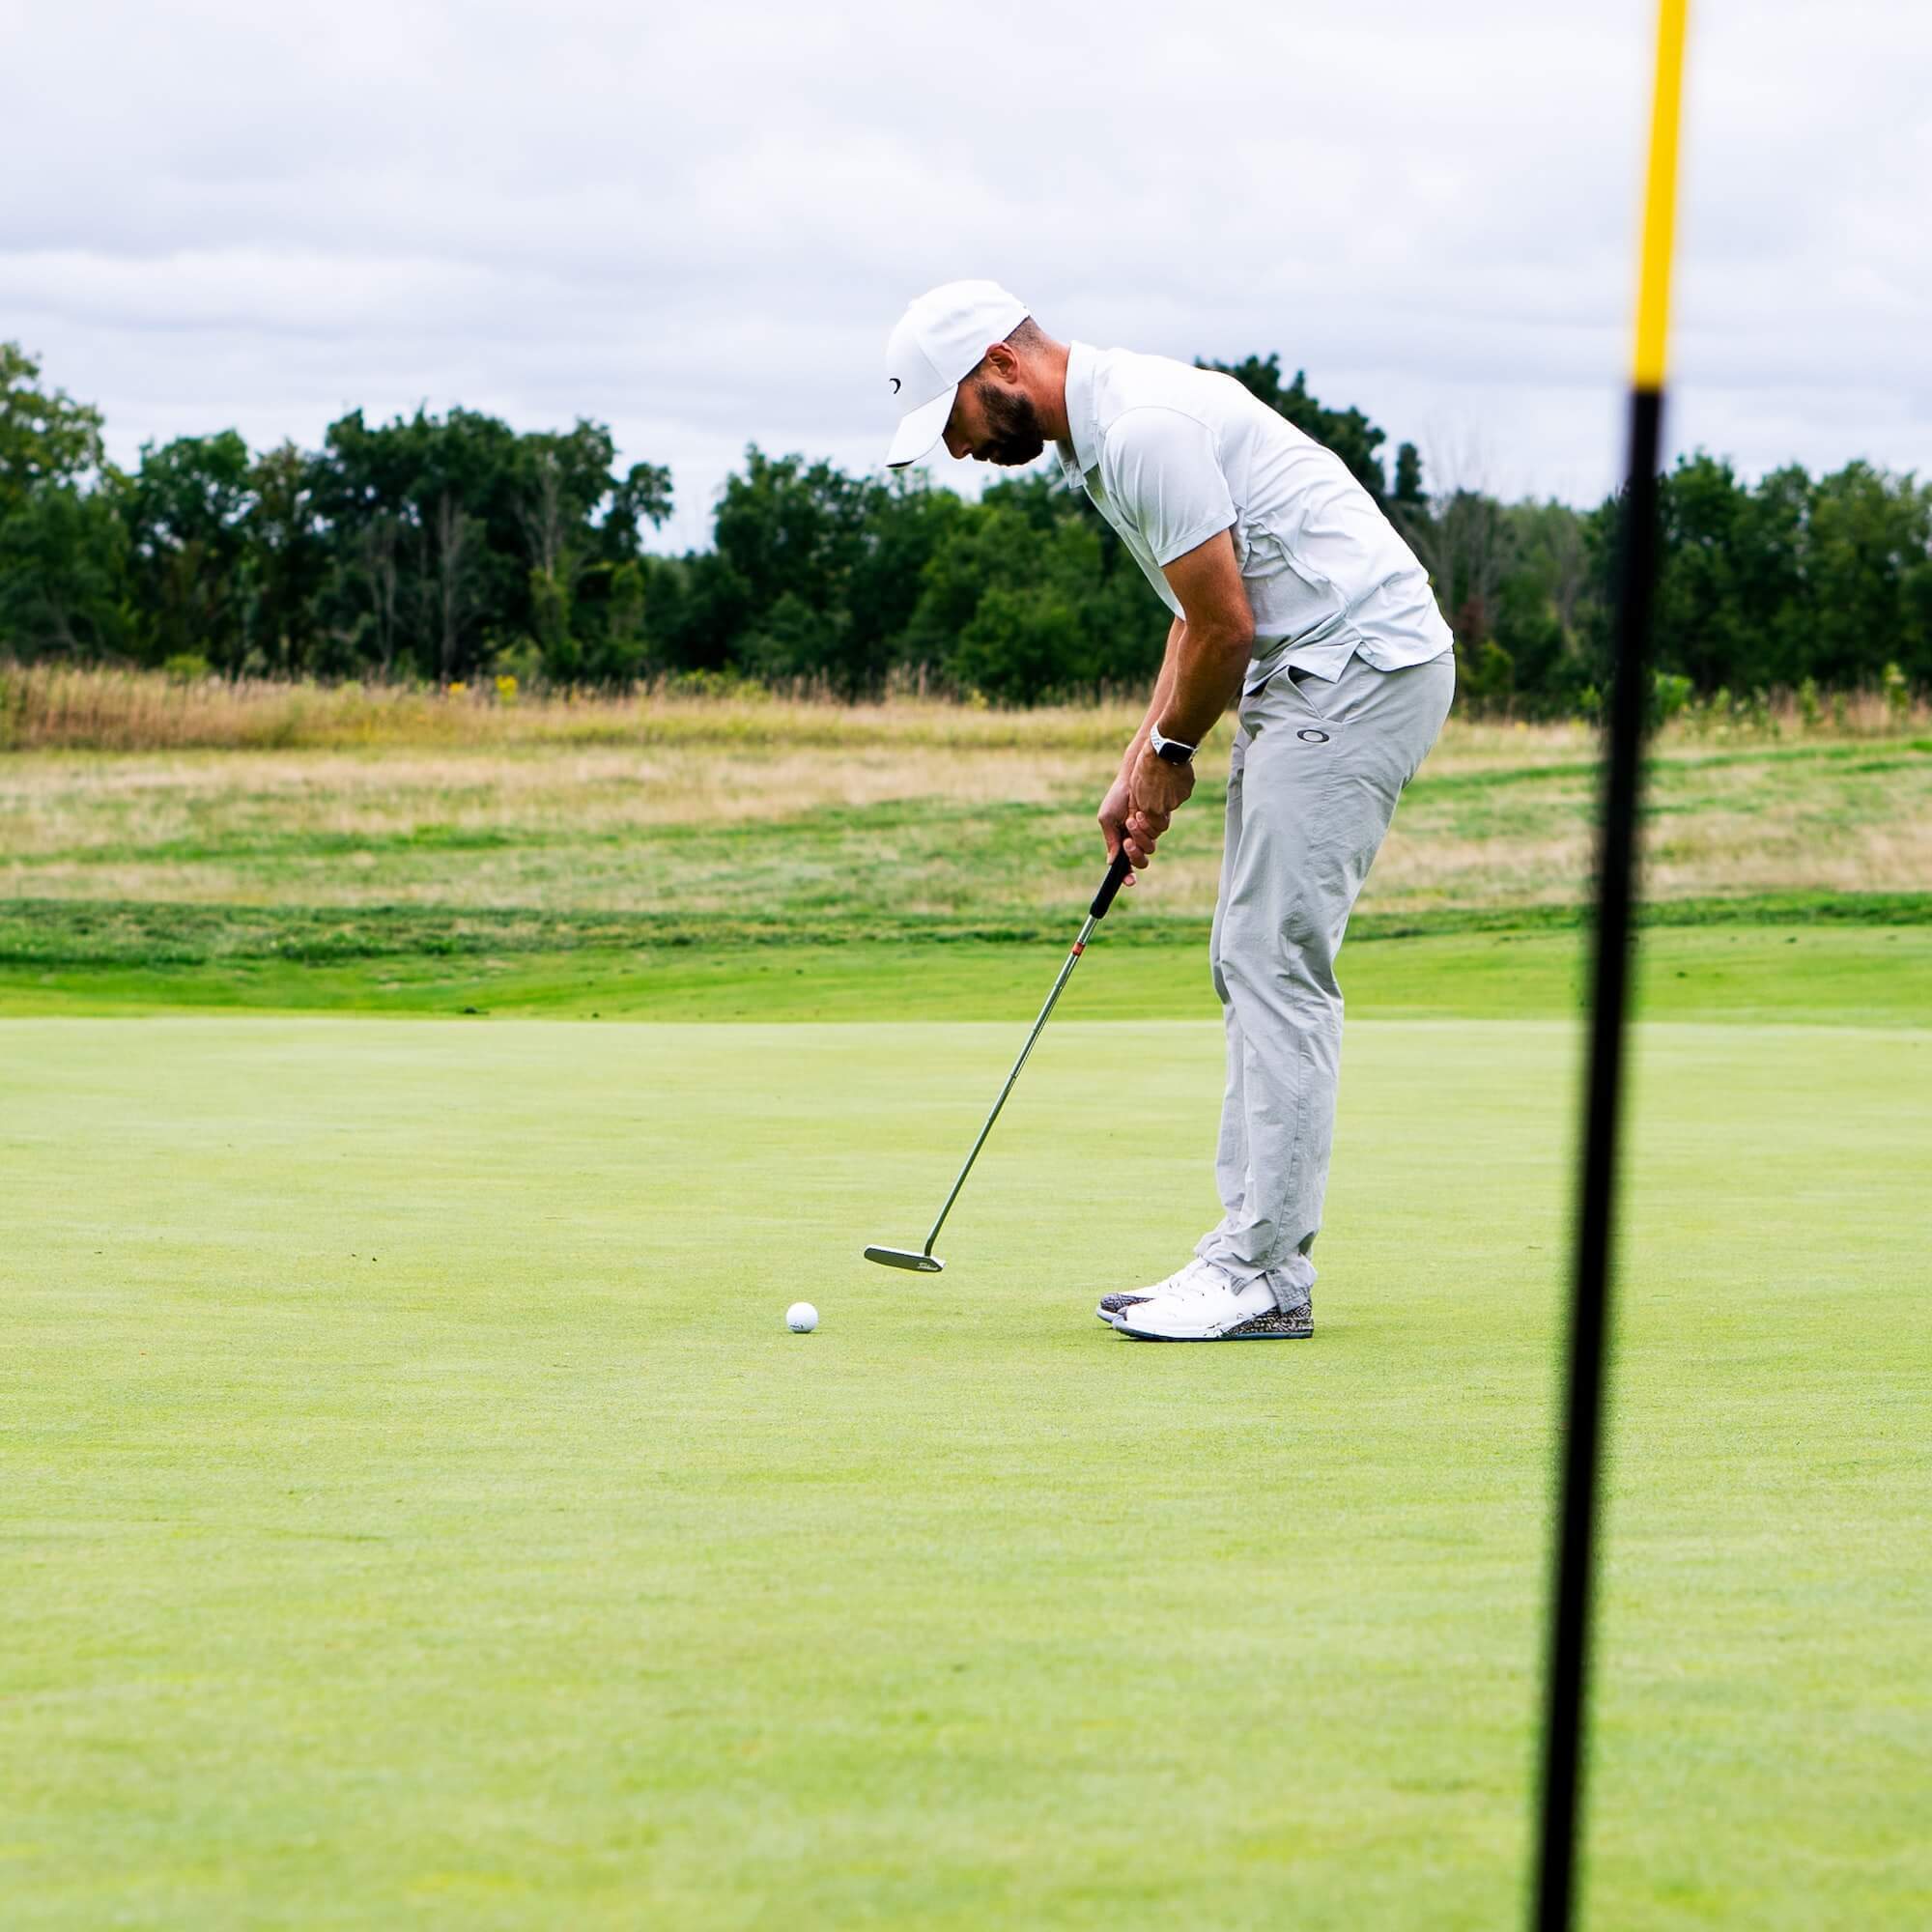 Man in white and grey golf clothing putts on the green